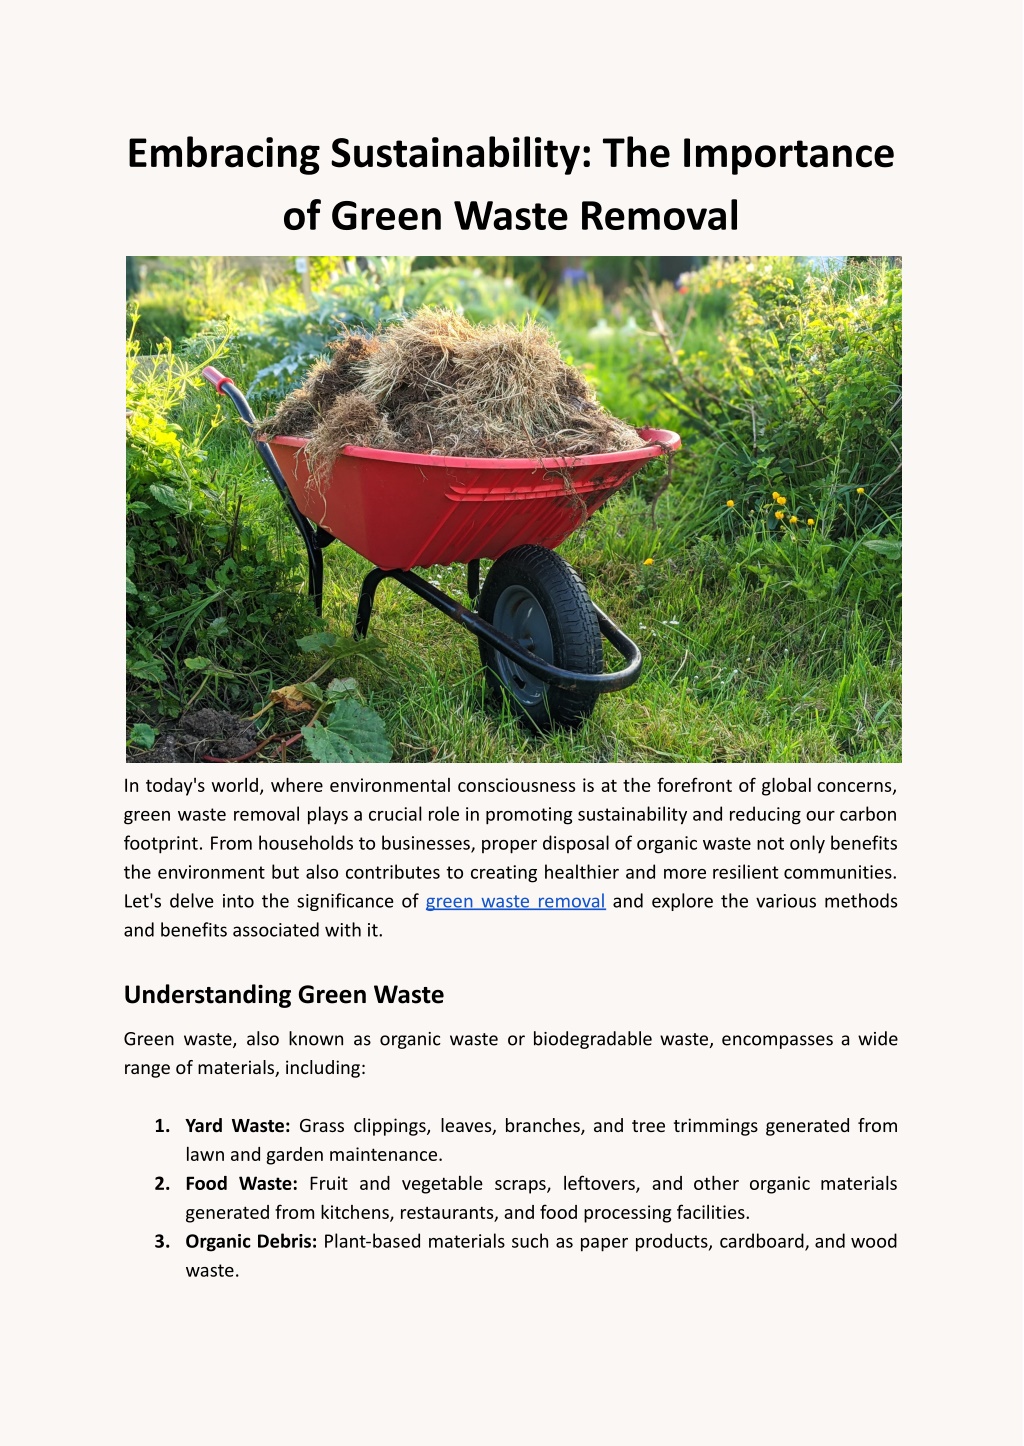 PPT - Embracing Sustainability: The Importance of Green Waste Removal ...